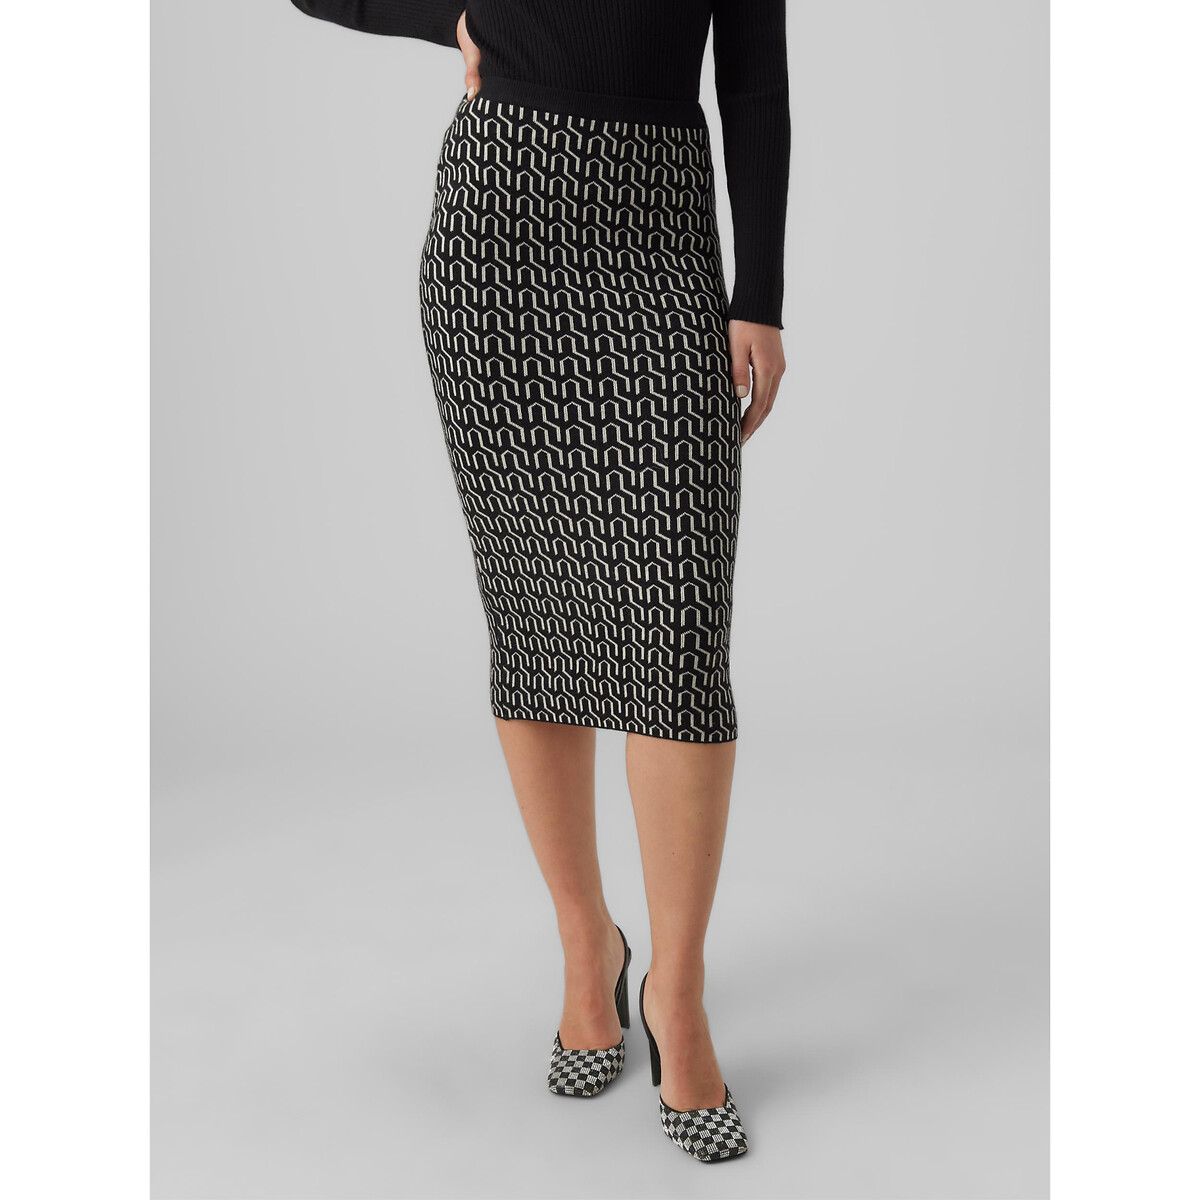 Image of Midi Pencil Skirt in Graphic Print